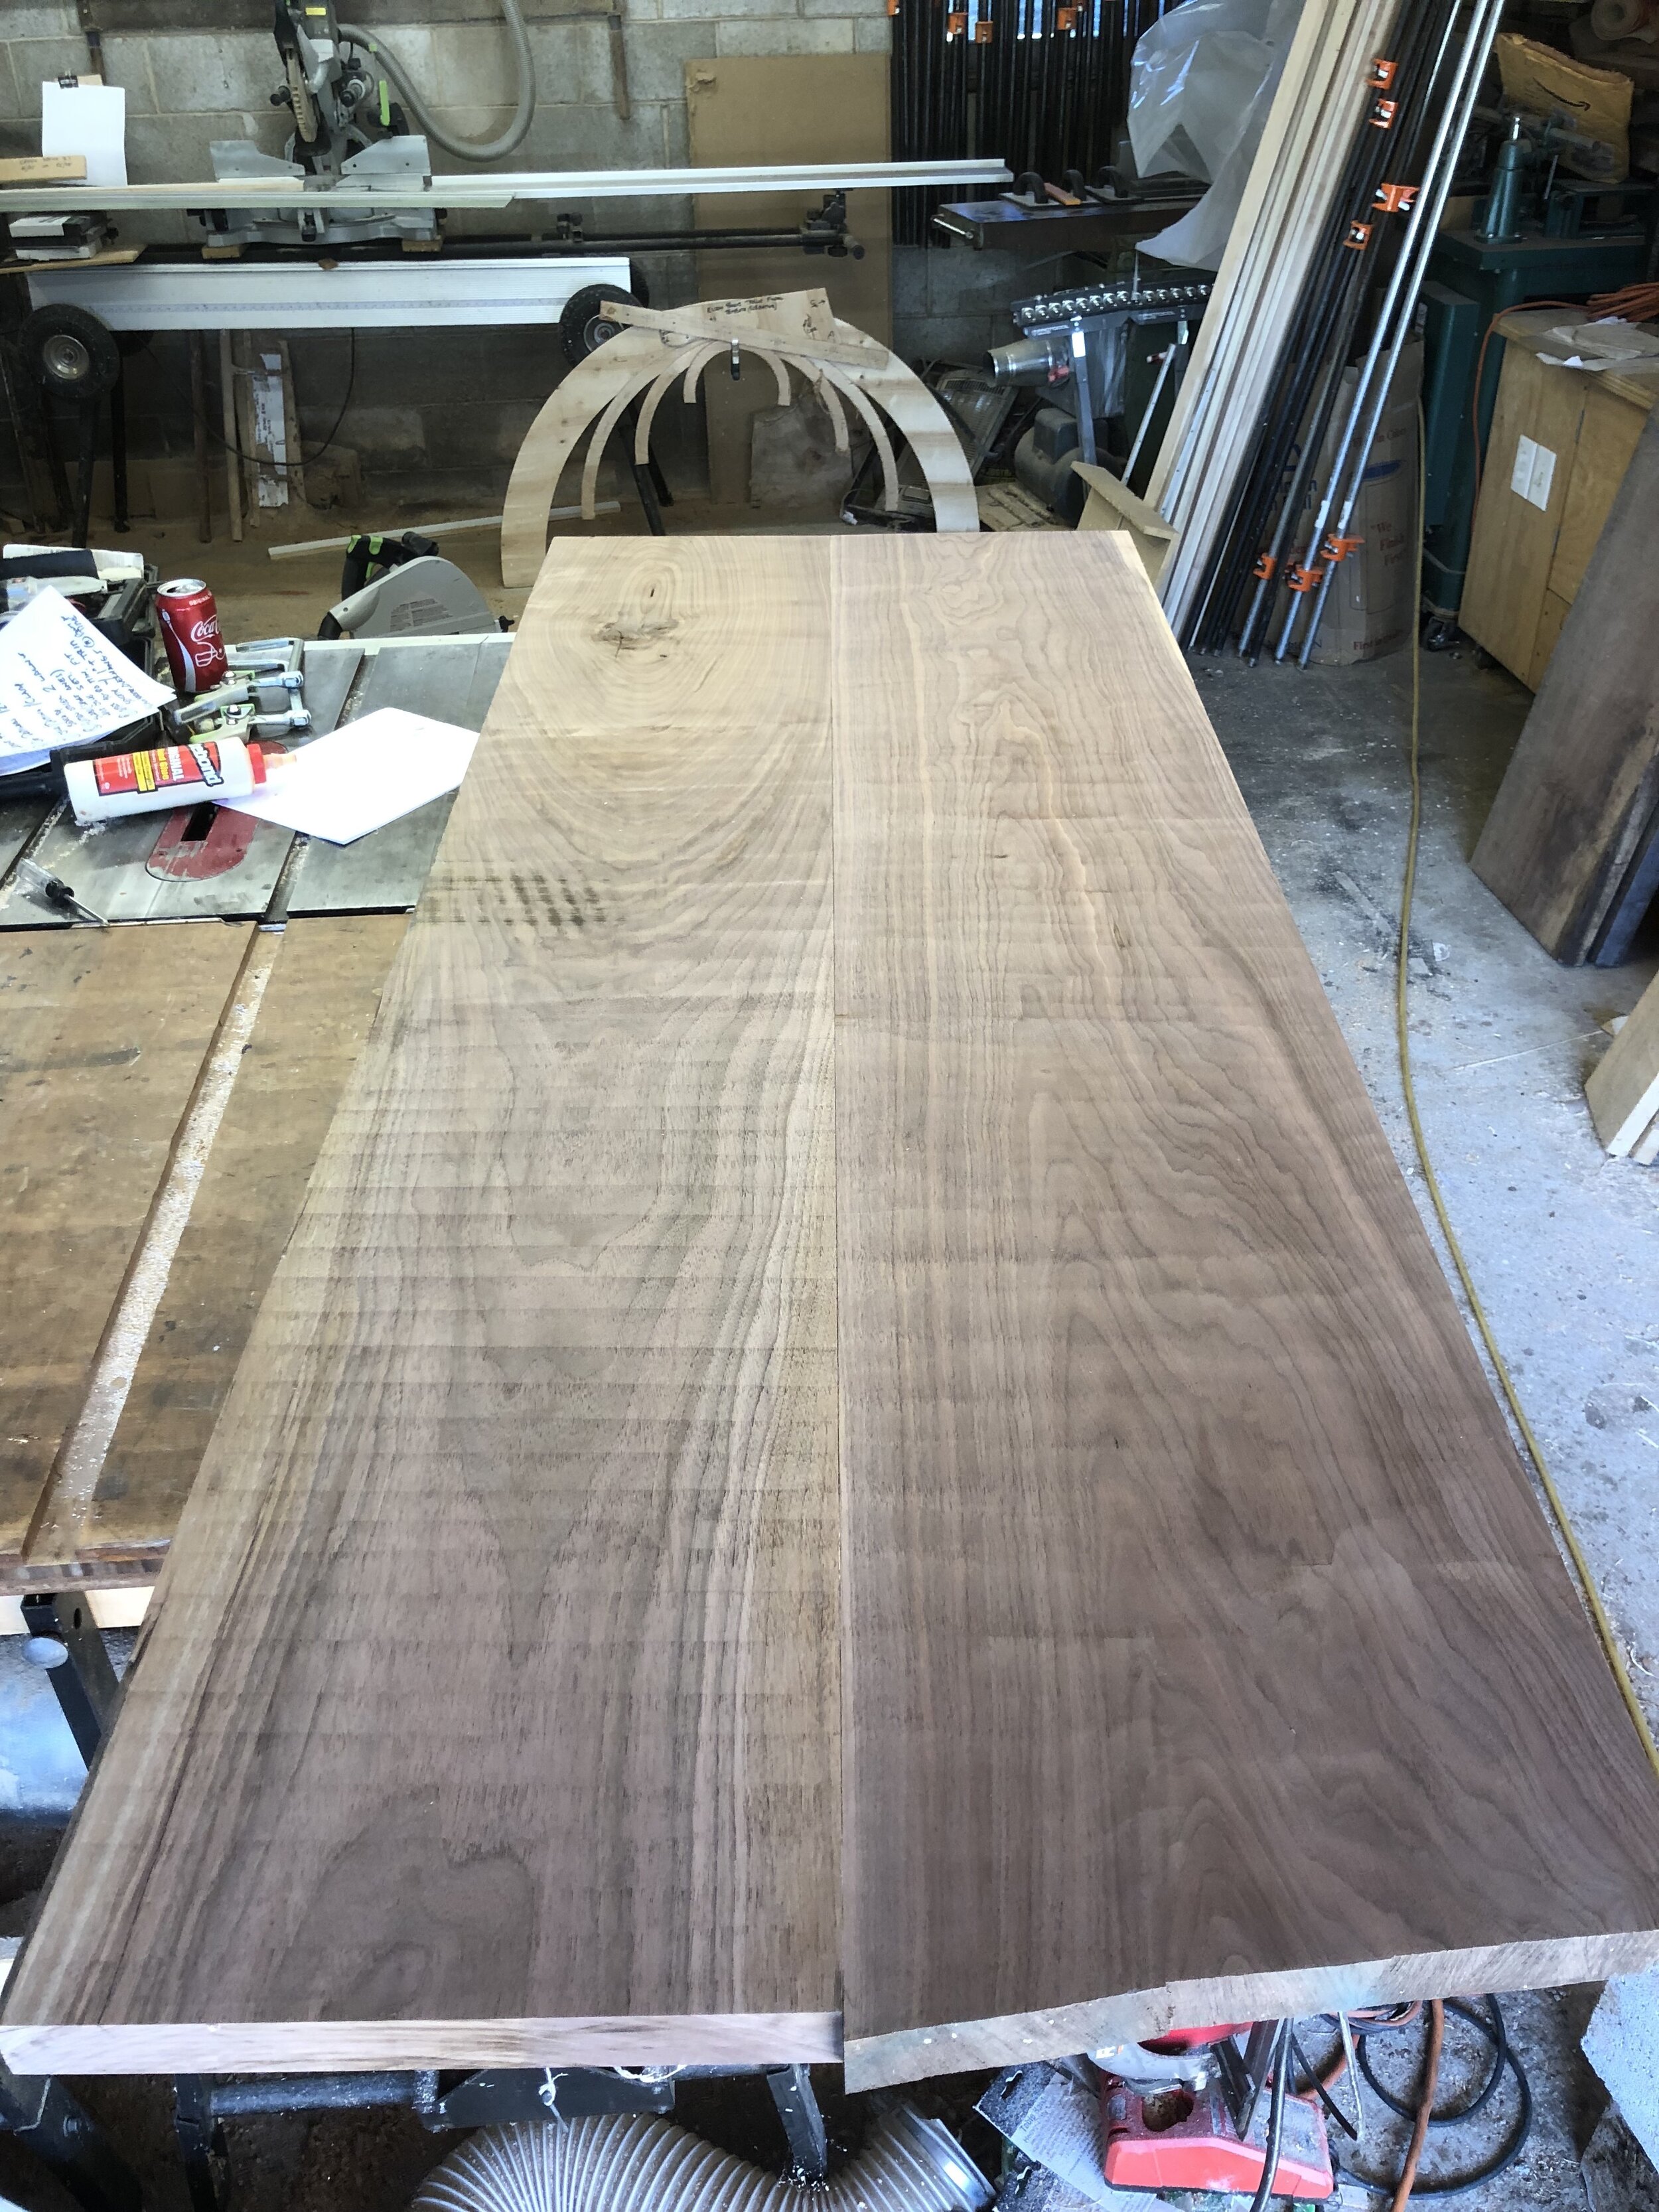  Next up was milling some black walnut planks to make a bench top. After I had them roughly planed to size, I played around with which sides to join up until I was happy with the look.  